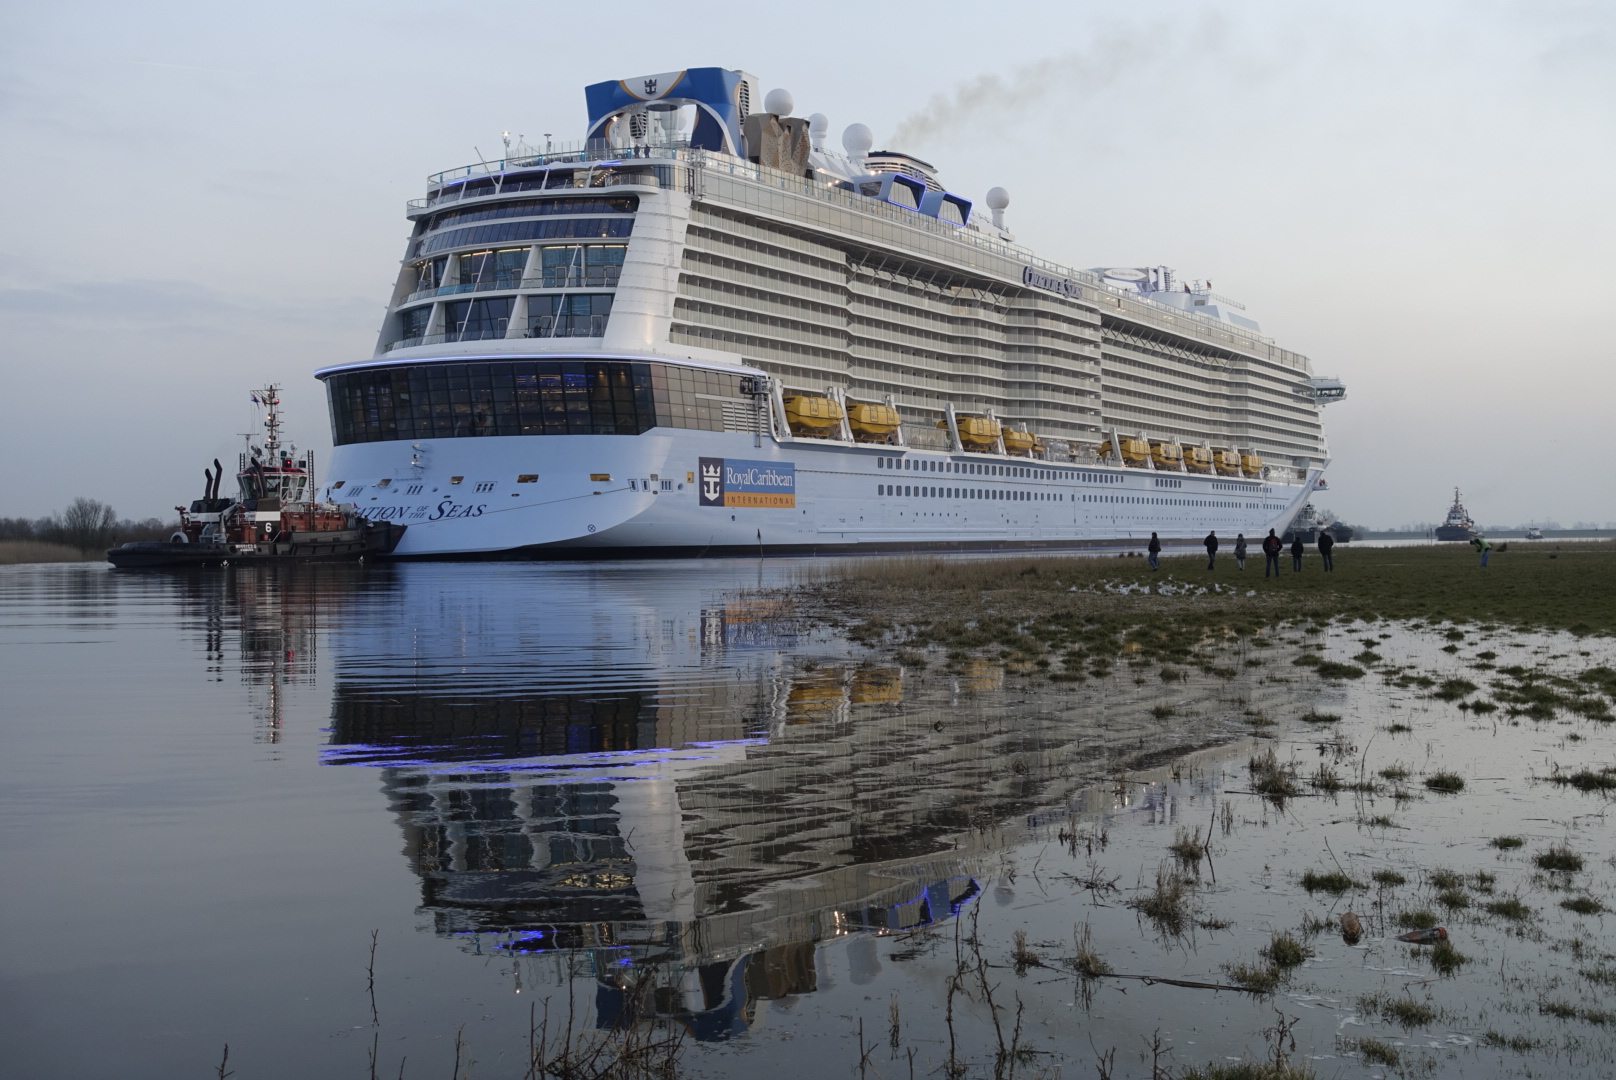 Ovation of the Seas begins its 26 mile conveyance down the River Ems out to the North Sea 2